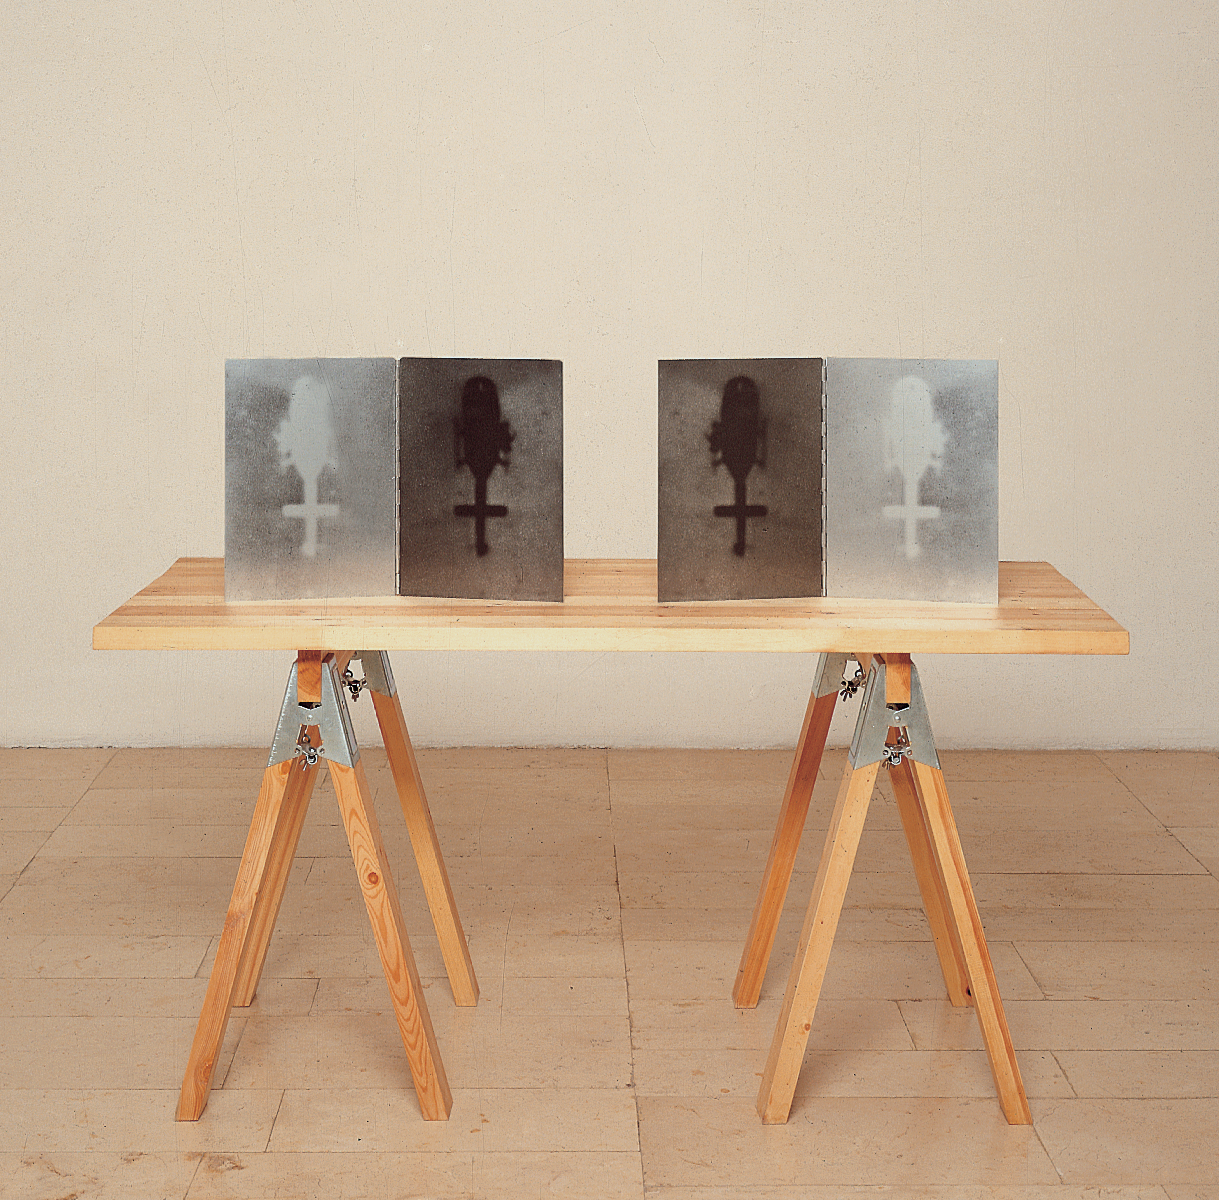 Sawhorse table with four images of a helicopter from a bird's-eye view propped up on it. 